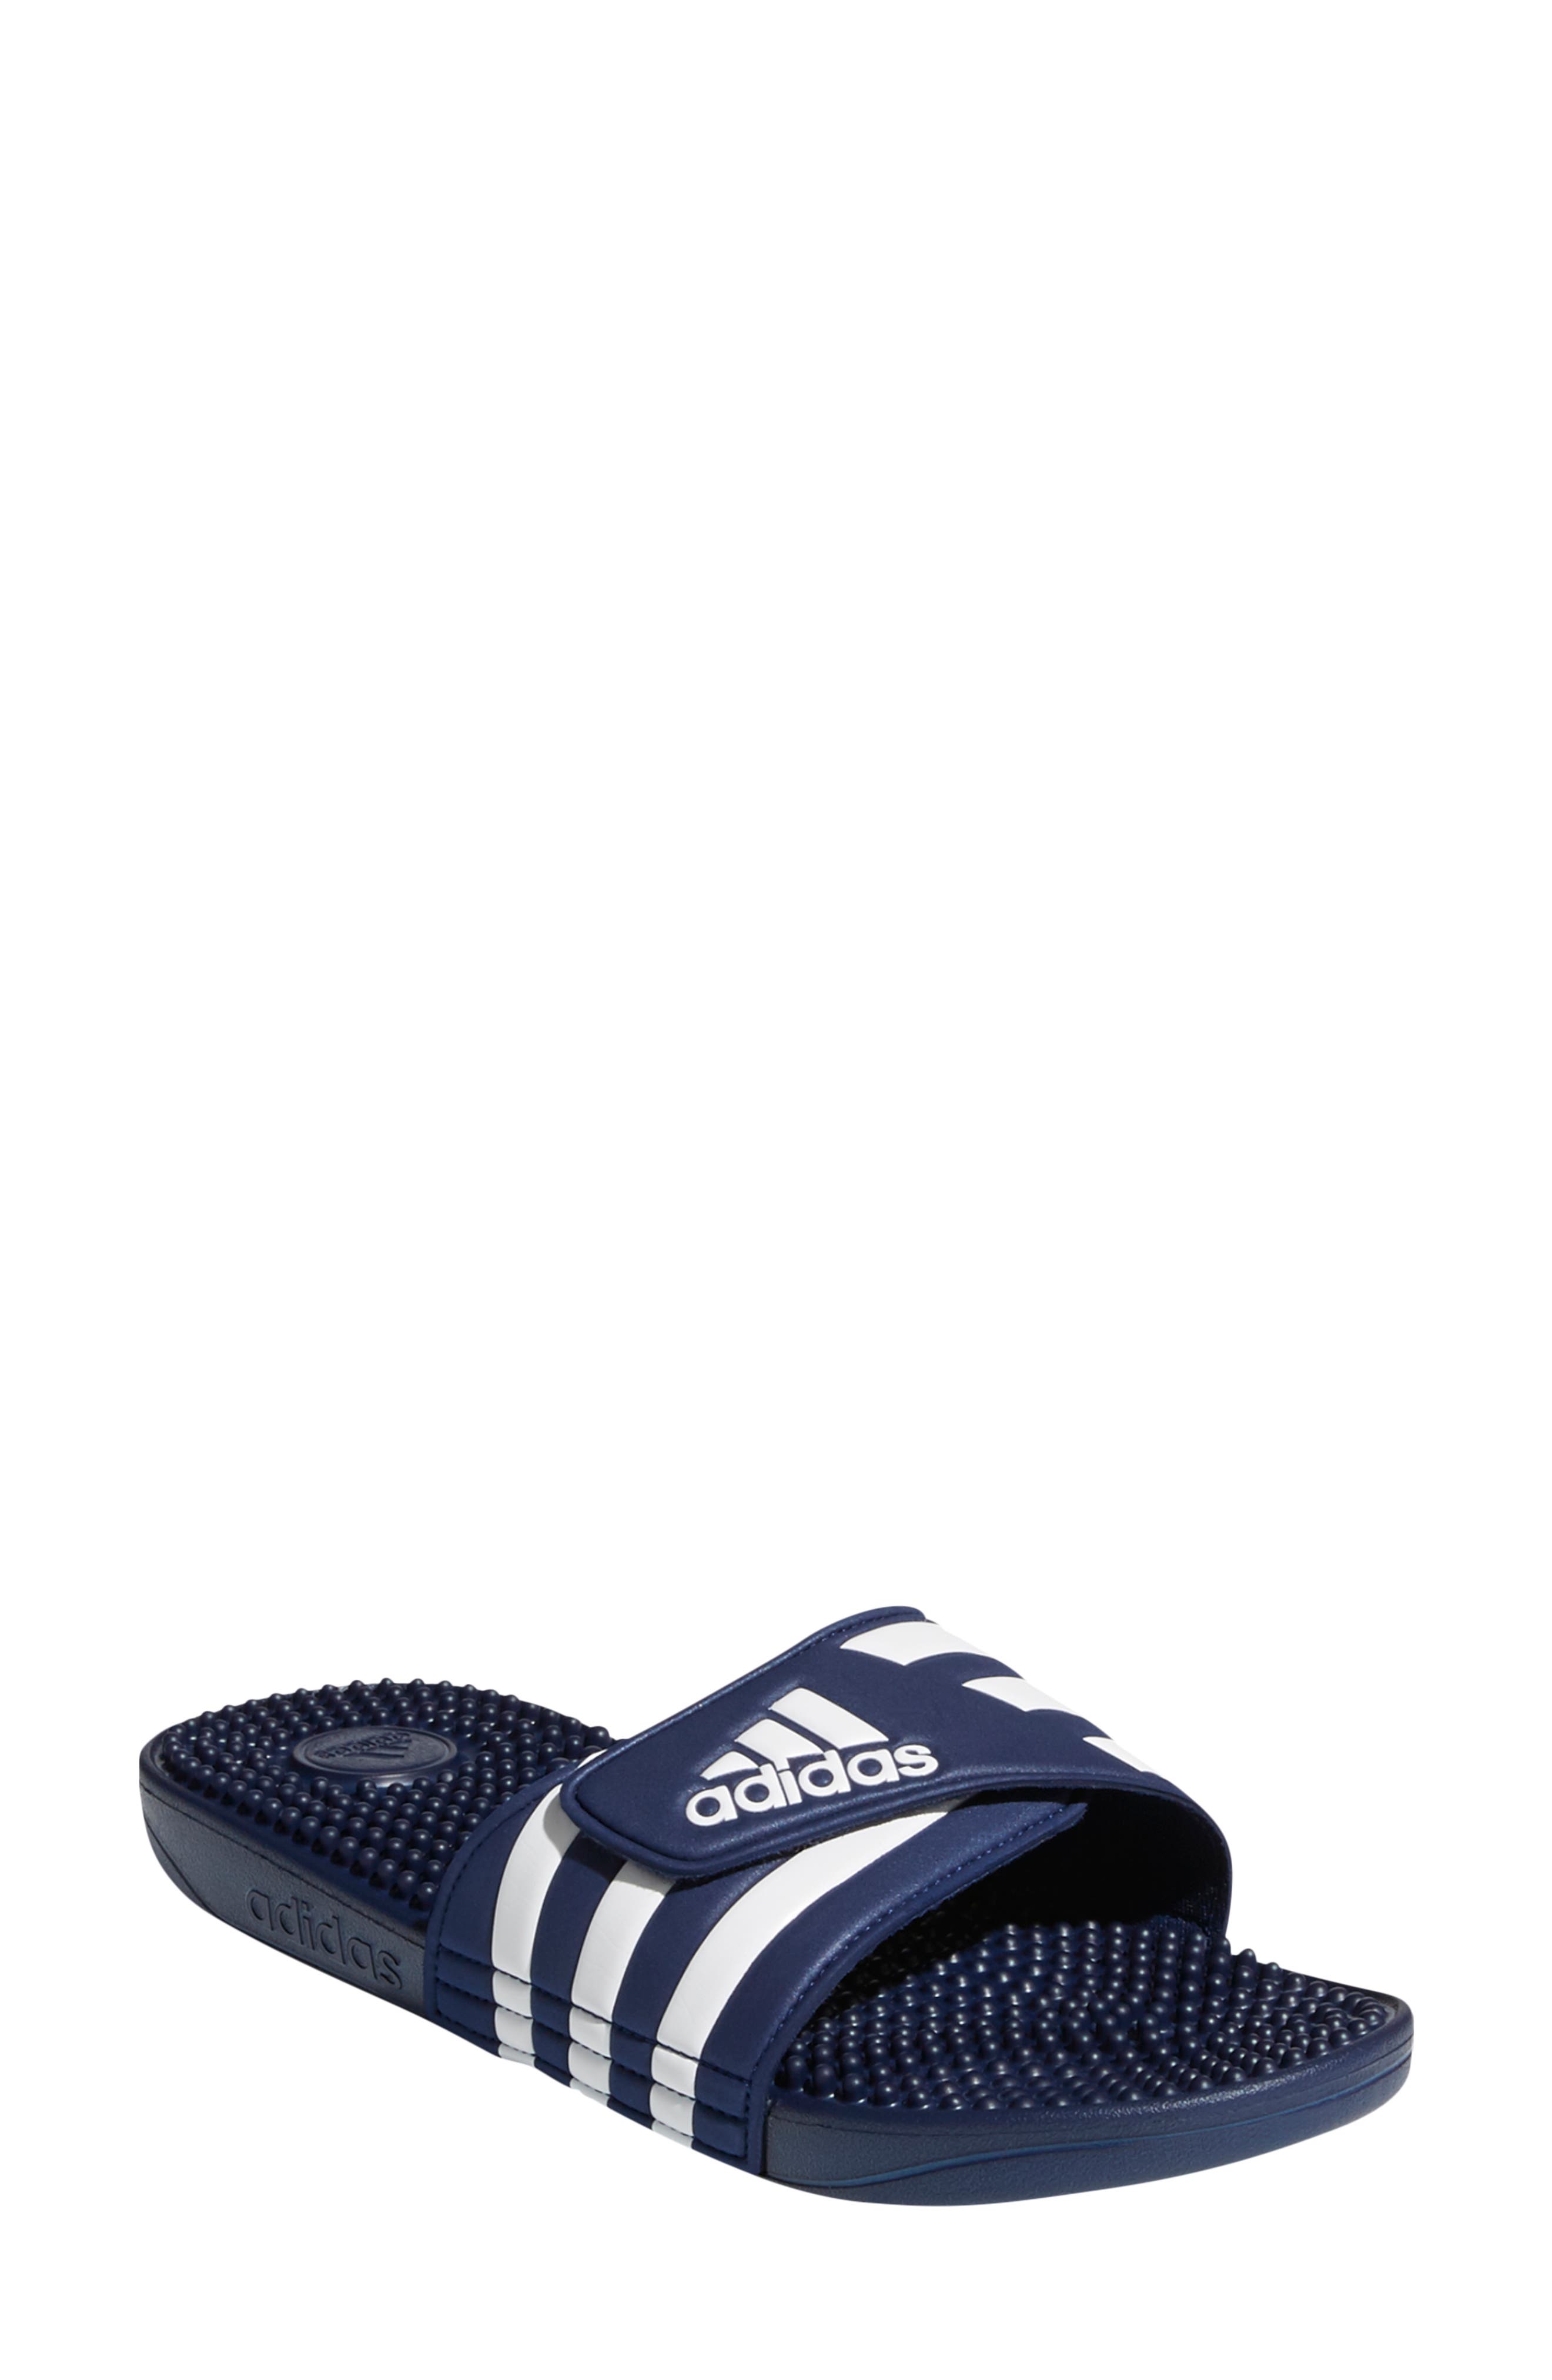 adidas slippers blue and white